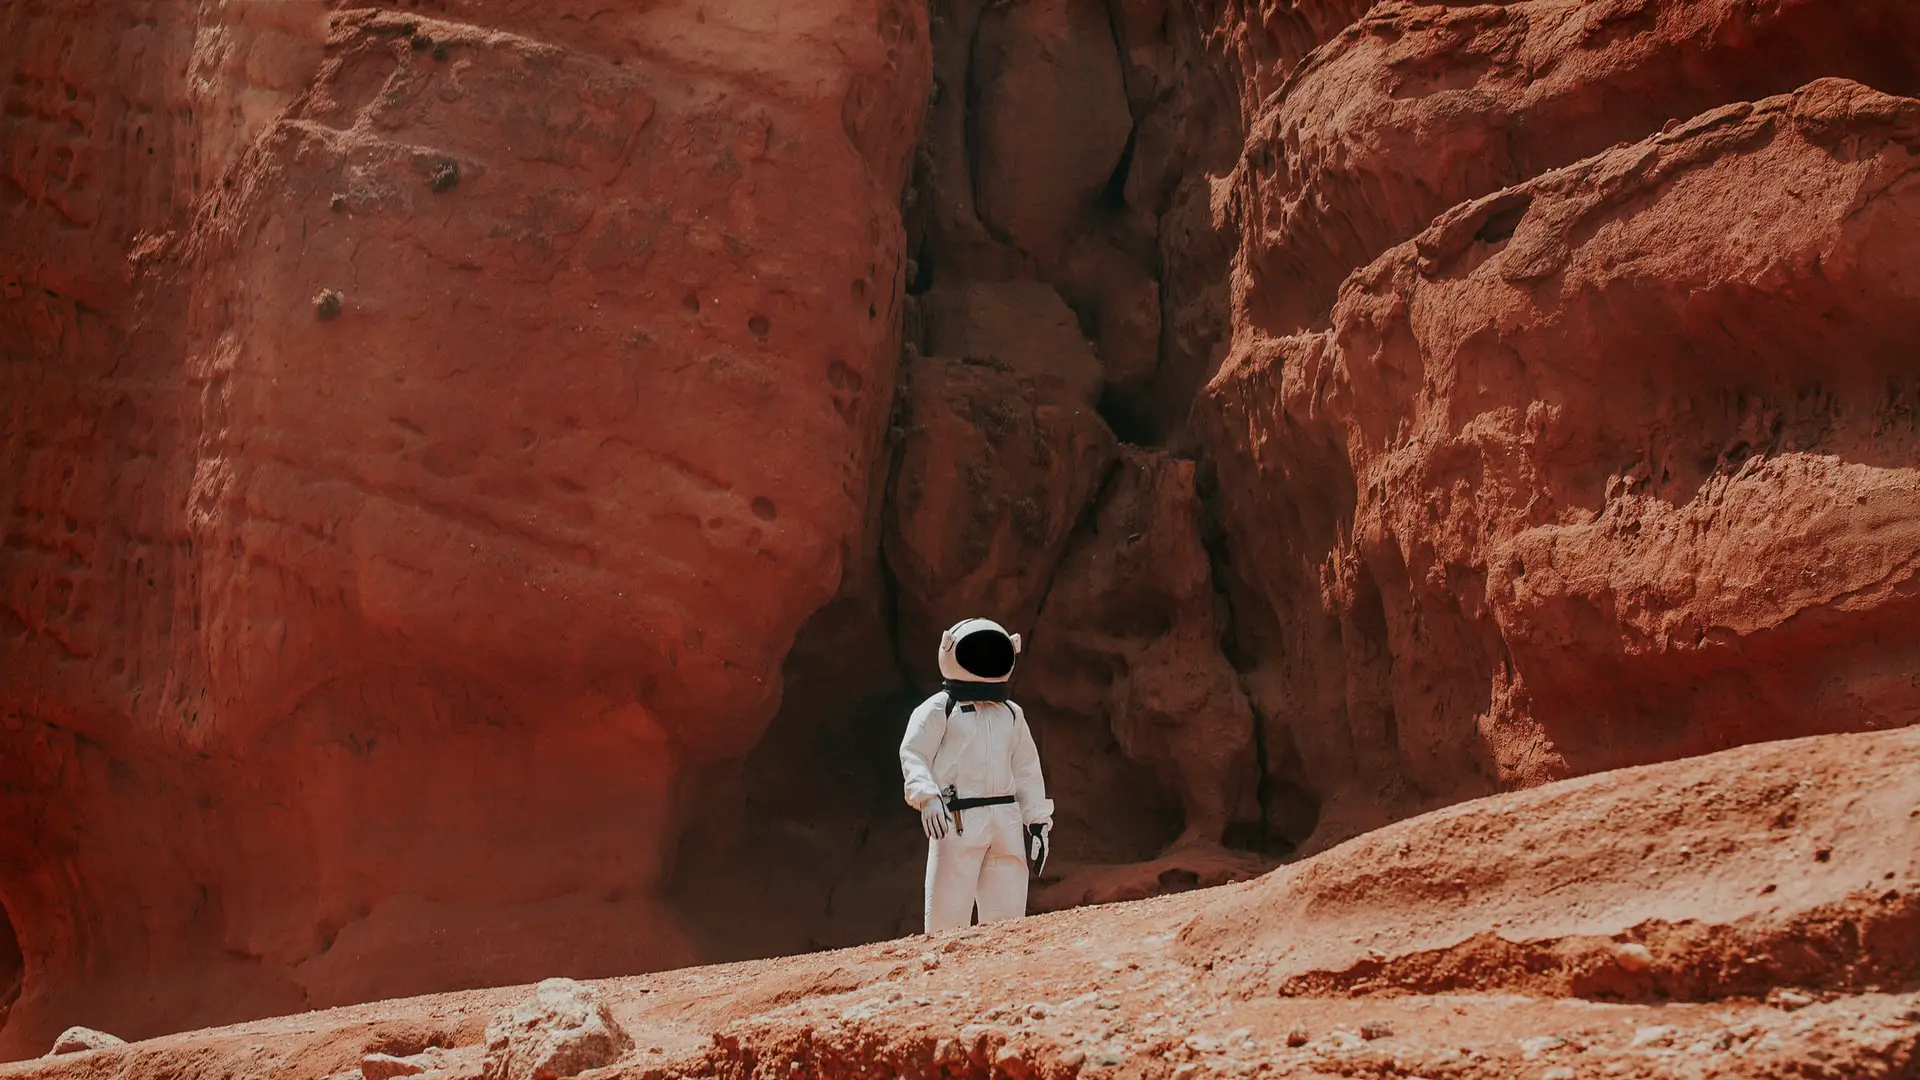 Mars Society Launches a Crowdfunding Campaign to Develop a VR Simulation for the Red Planet